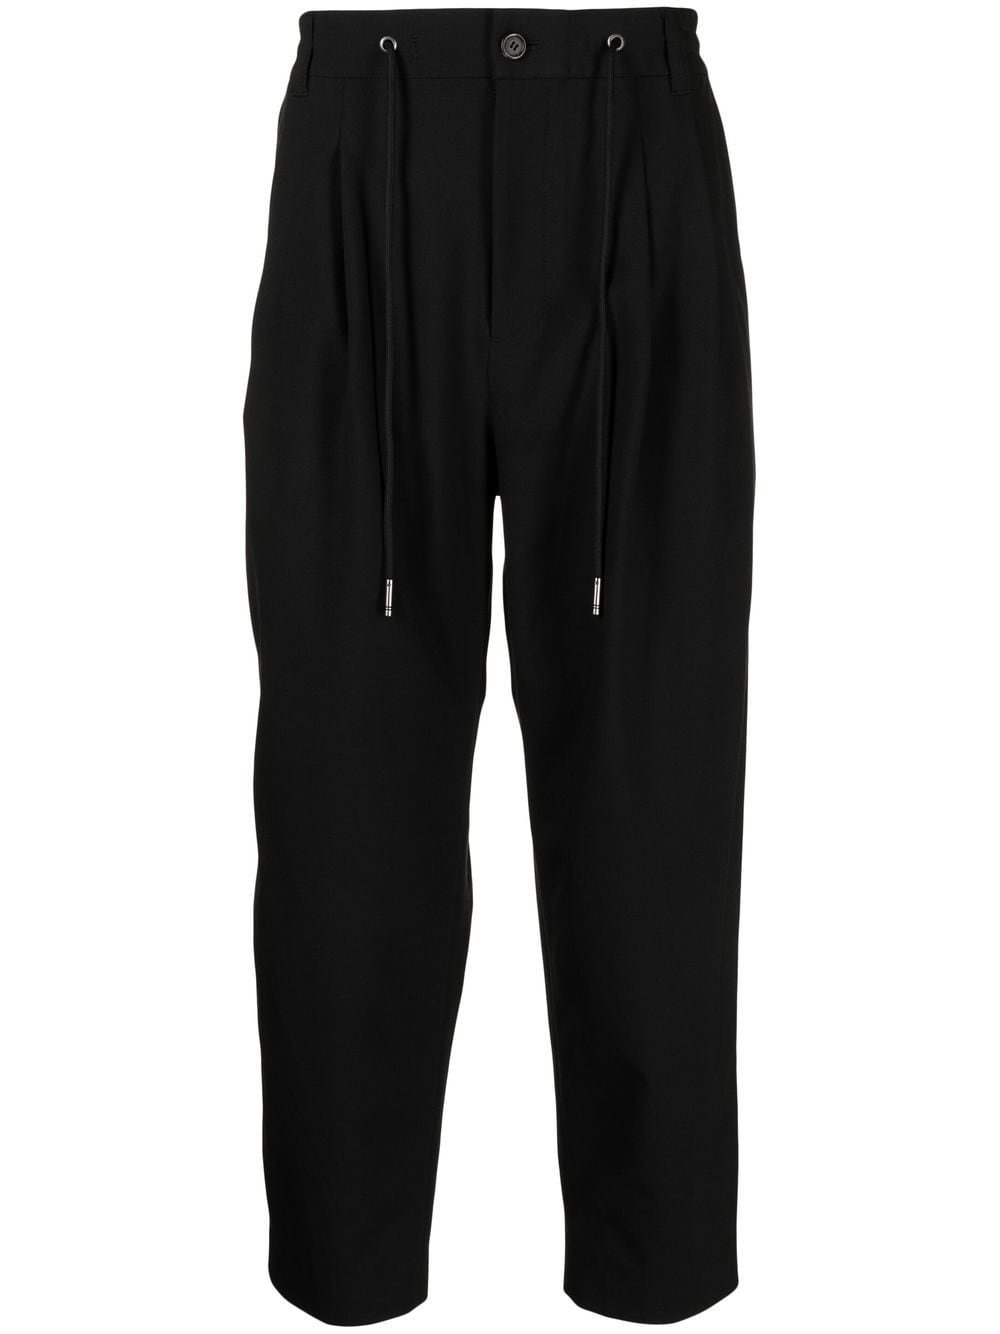 Carrot tapered-leg trousers